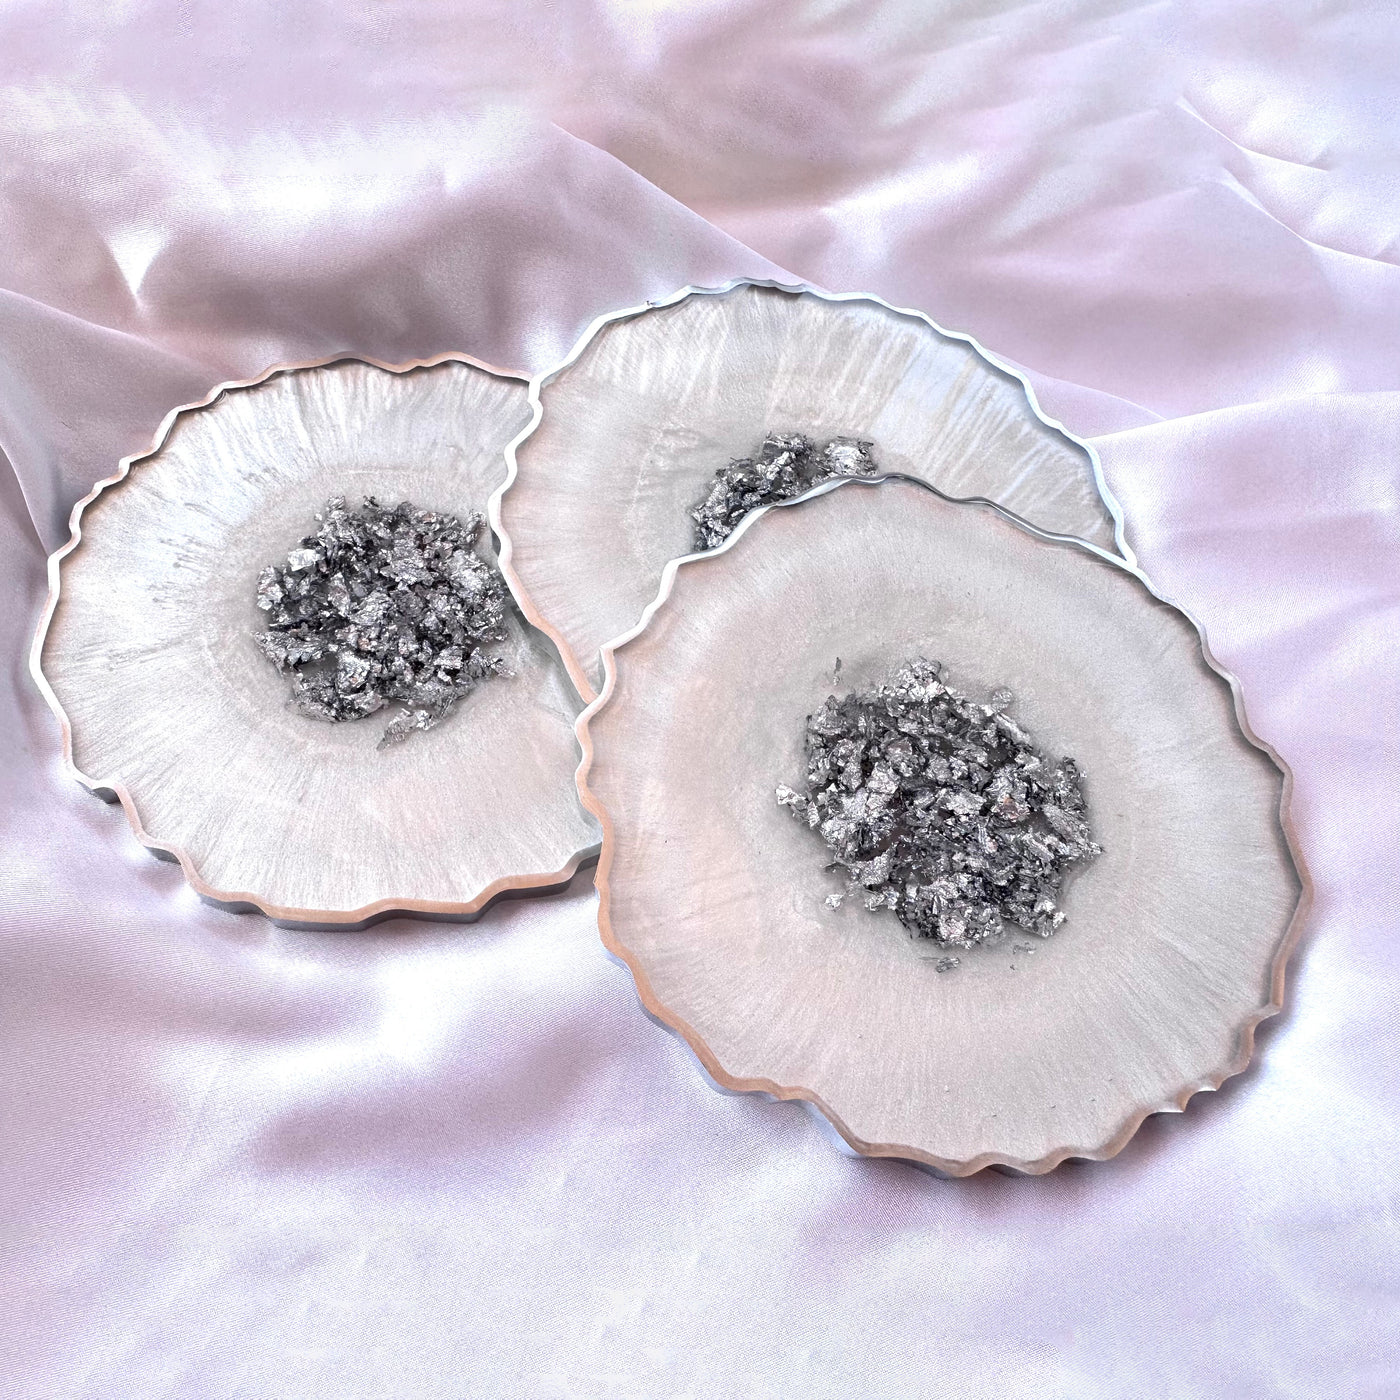 Snow White & Chrome Large Resin Geode Coasters withSilver Accented Rim Edges - Jasmin Renee Art - Three Coasters